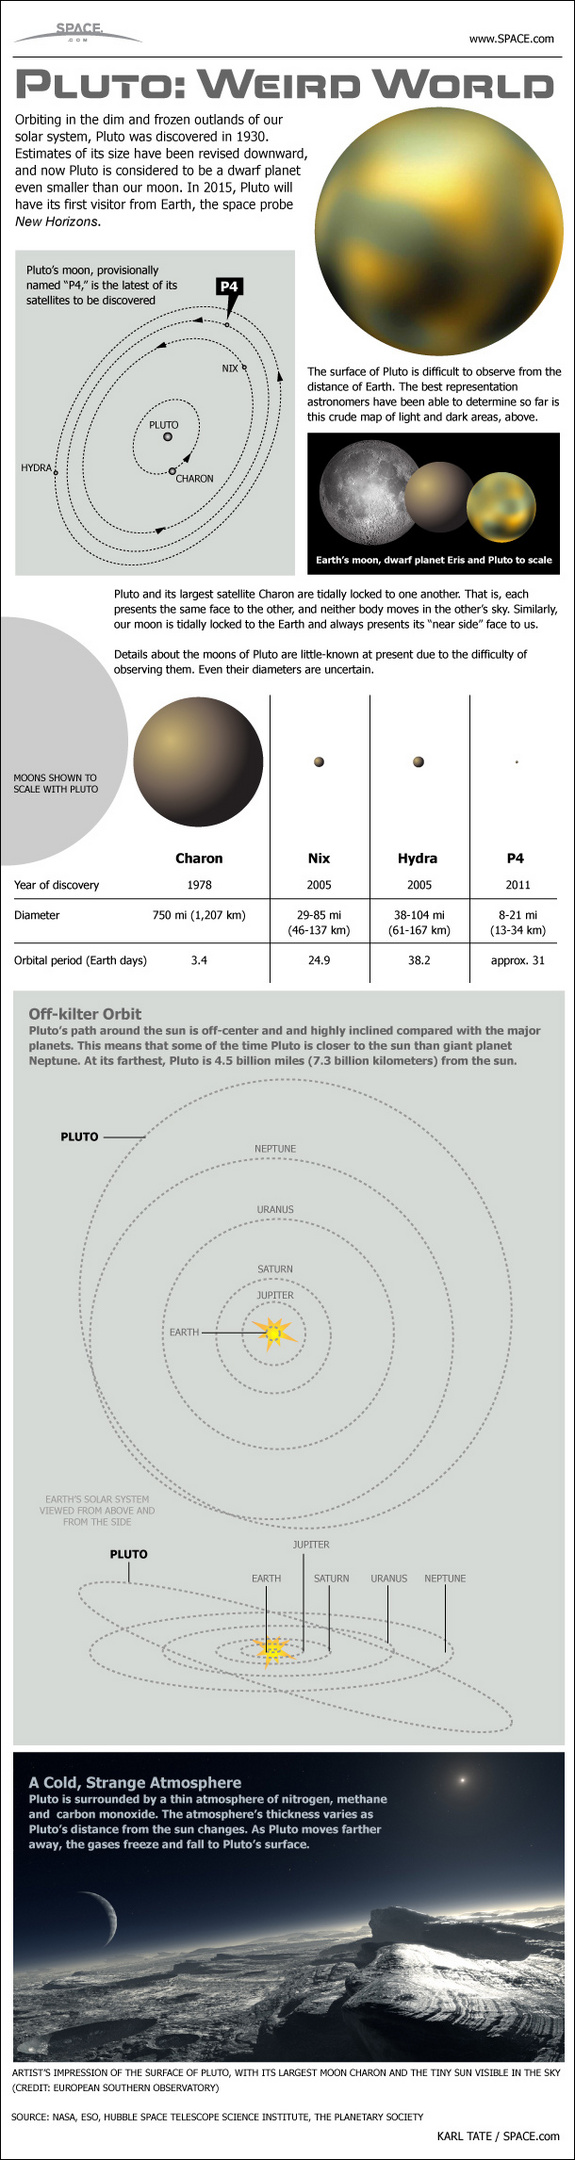 Learn all about Pluto's weirdly eccentric orbit, four moons and more in this SPACE.com infographic.